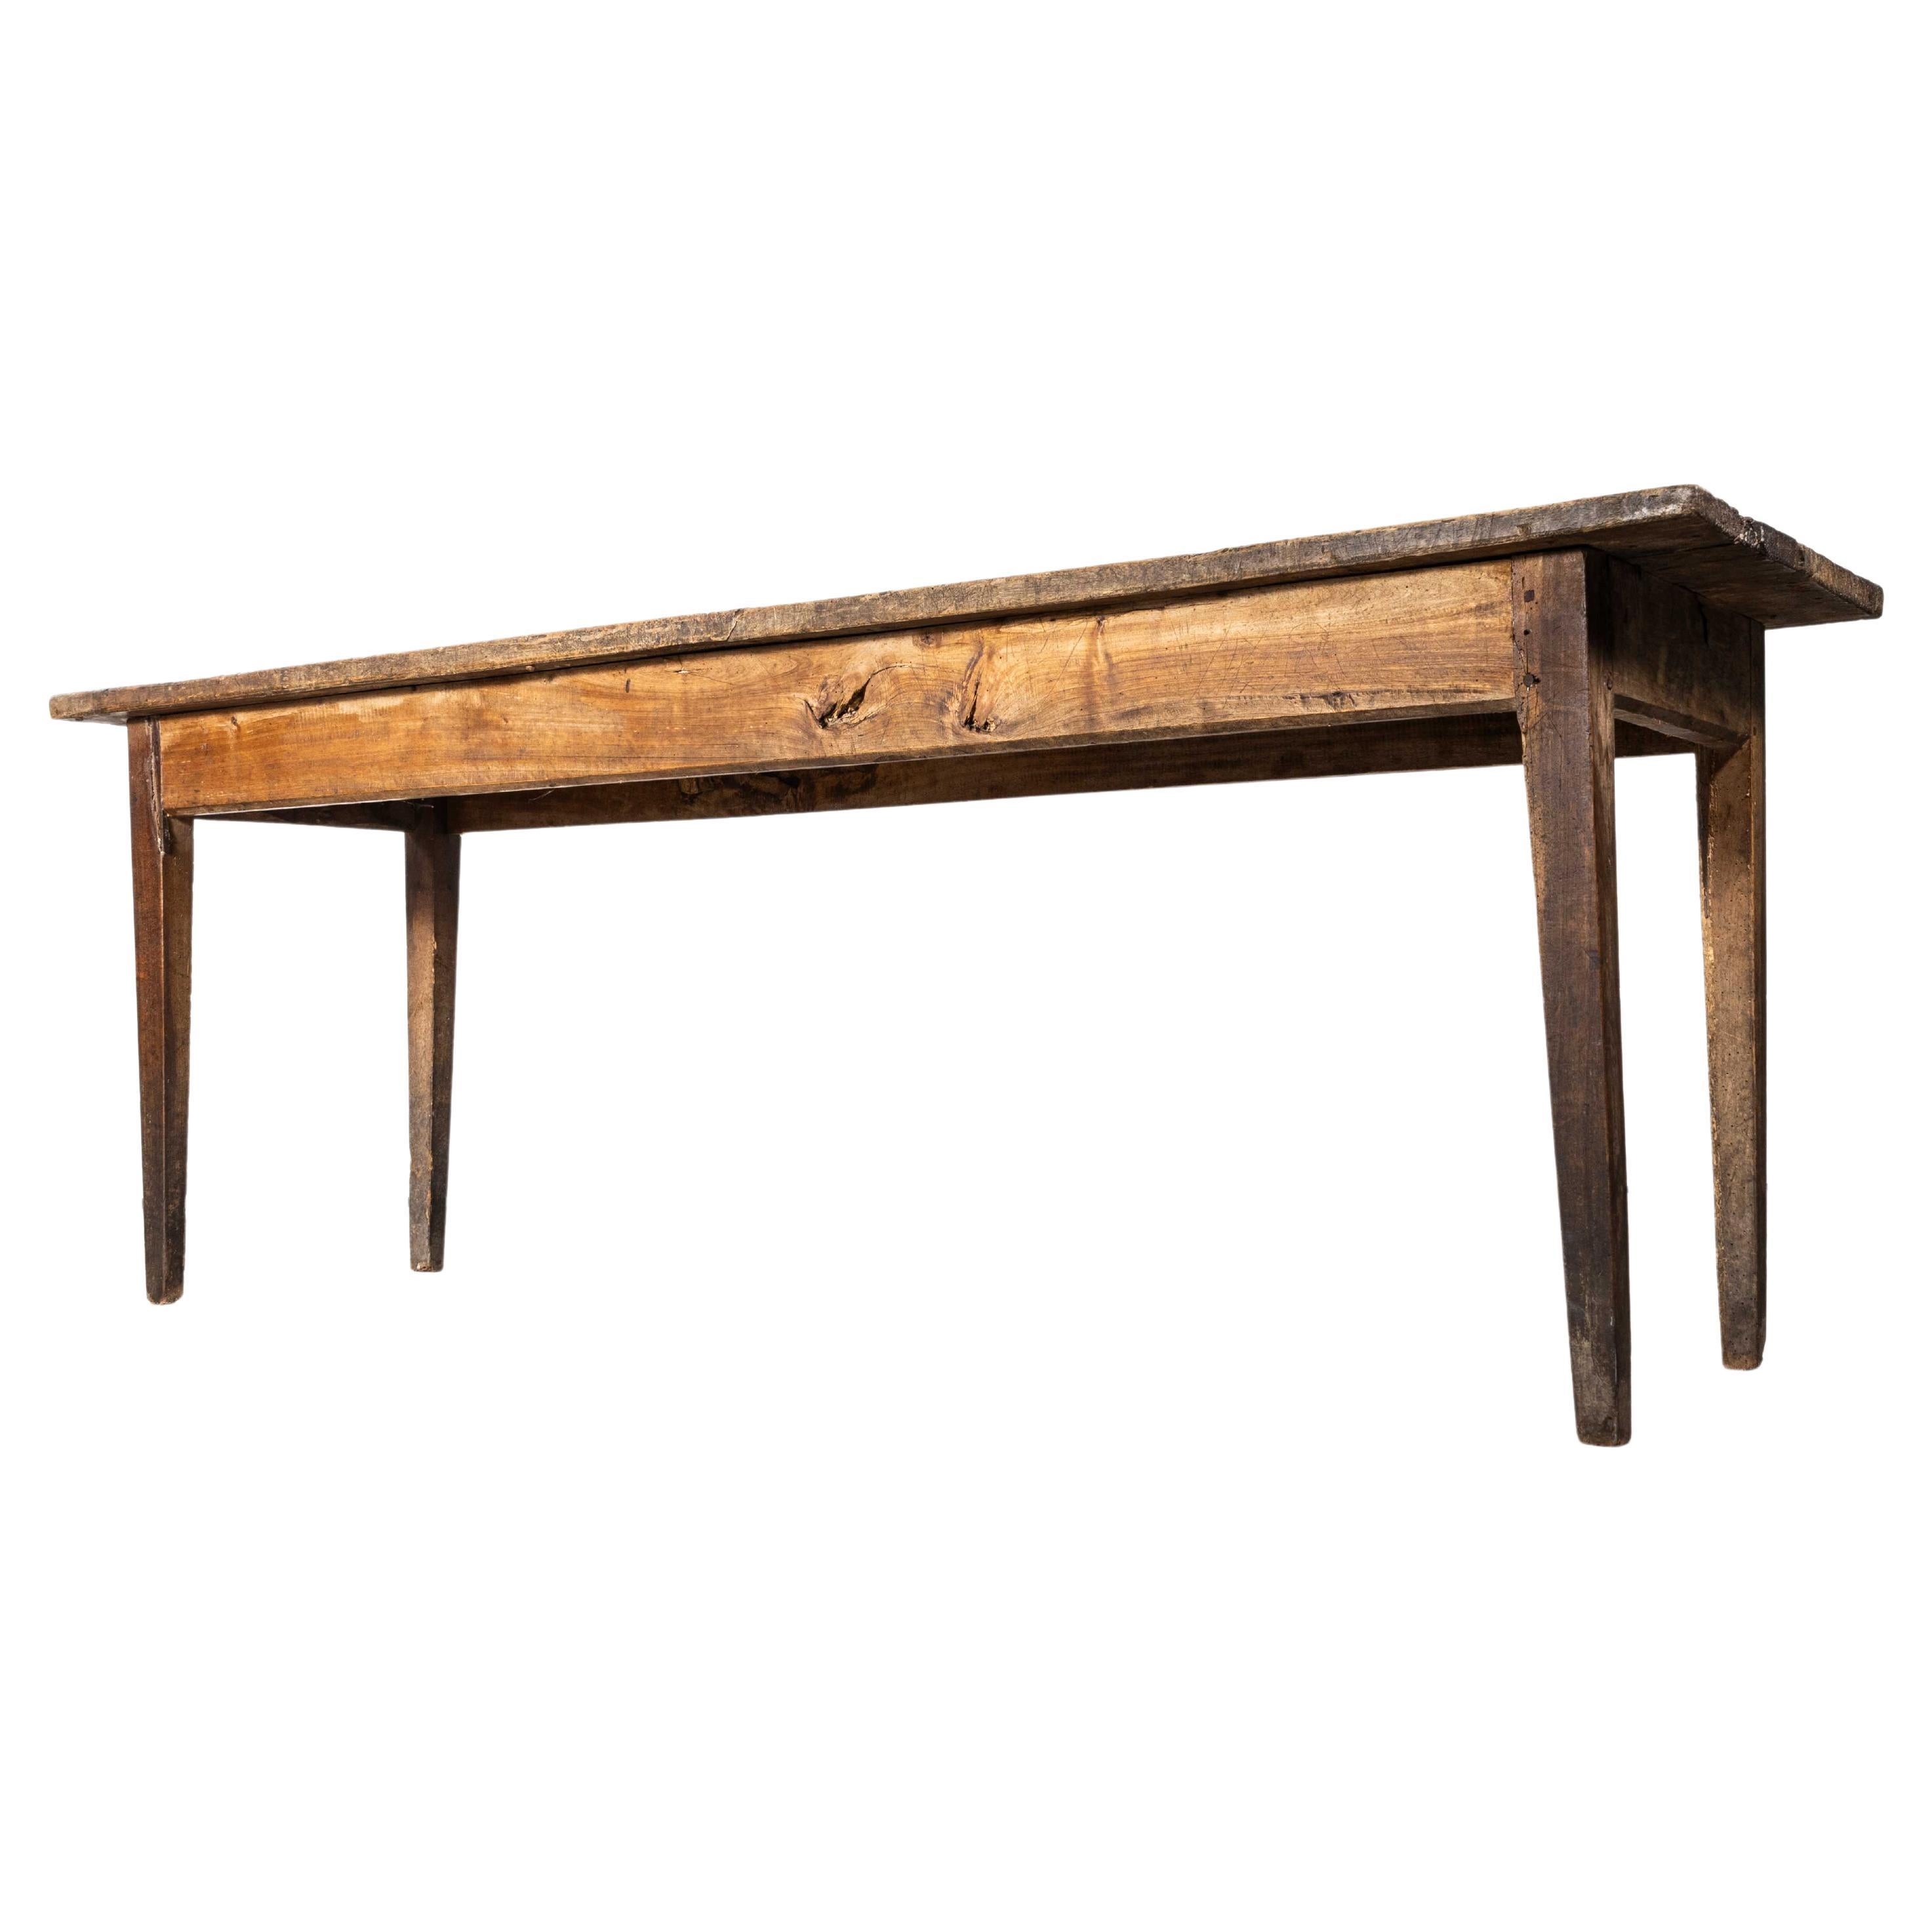 1940's French Narrow Farmhouse Table - Two Plank Top